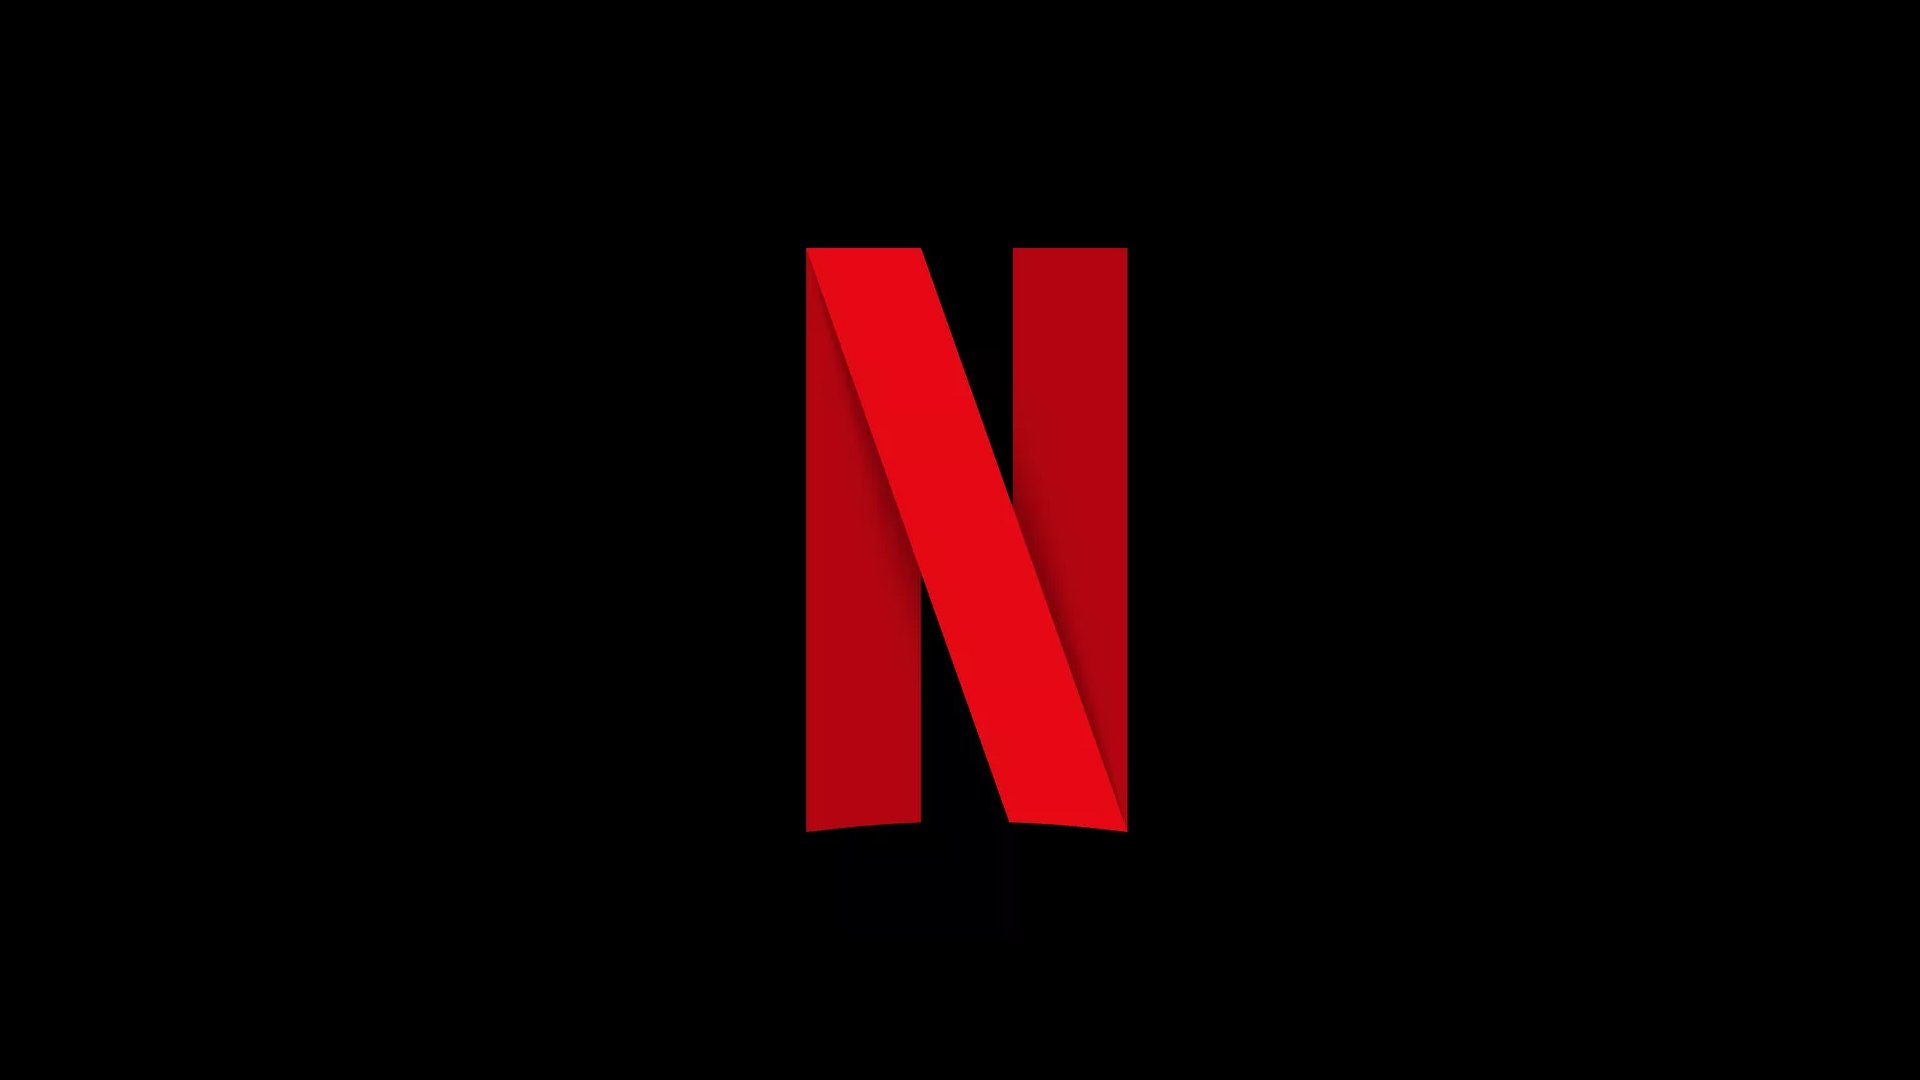 Netflix Will Host A Gaming Related Panel During E3 2019